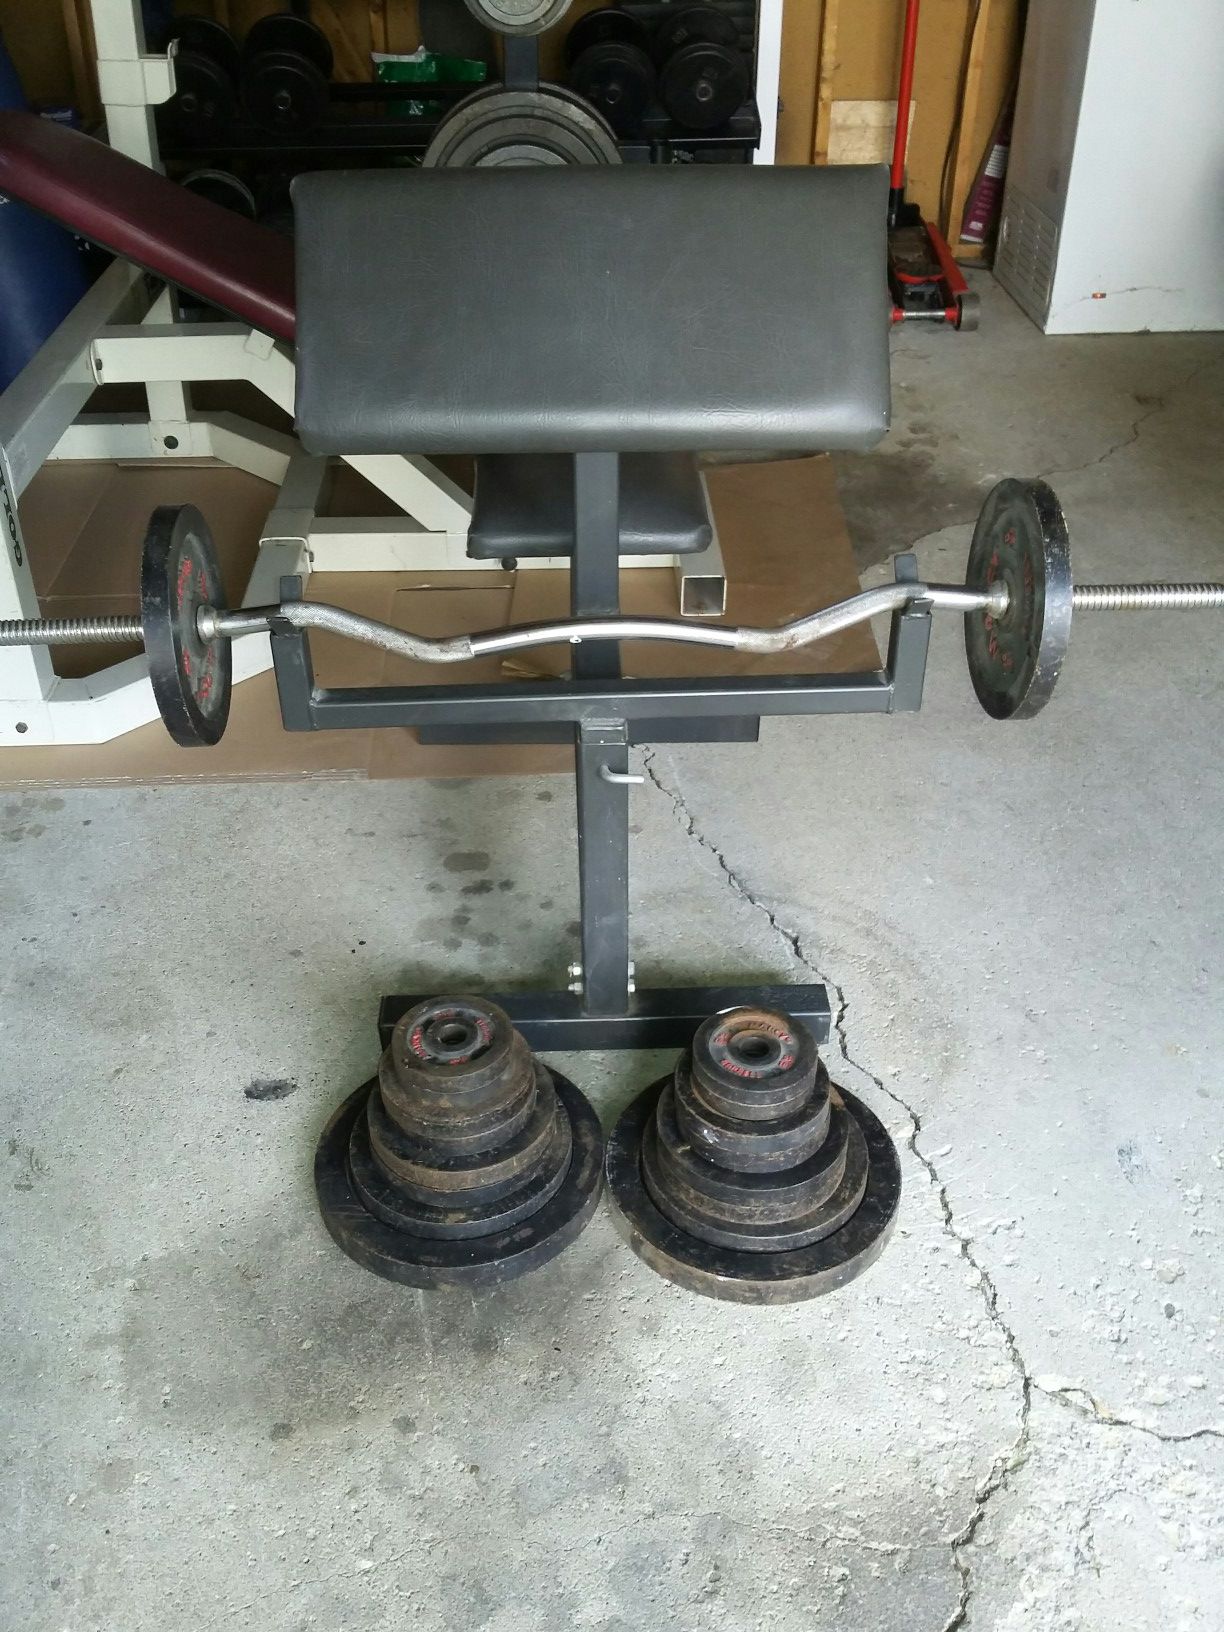 Curling bench (preacher bench) curling bar clamps and 150 pounds of weights